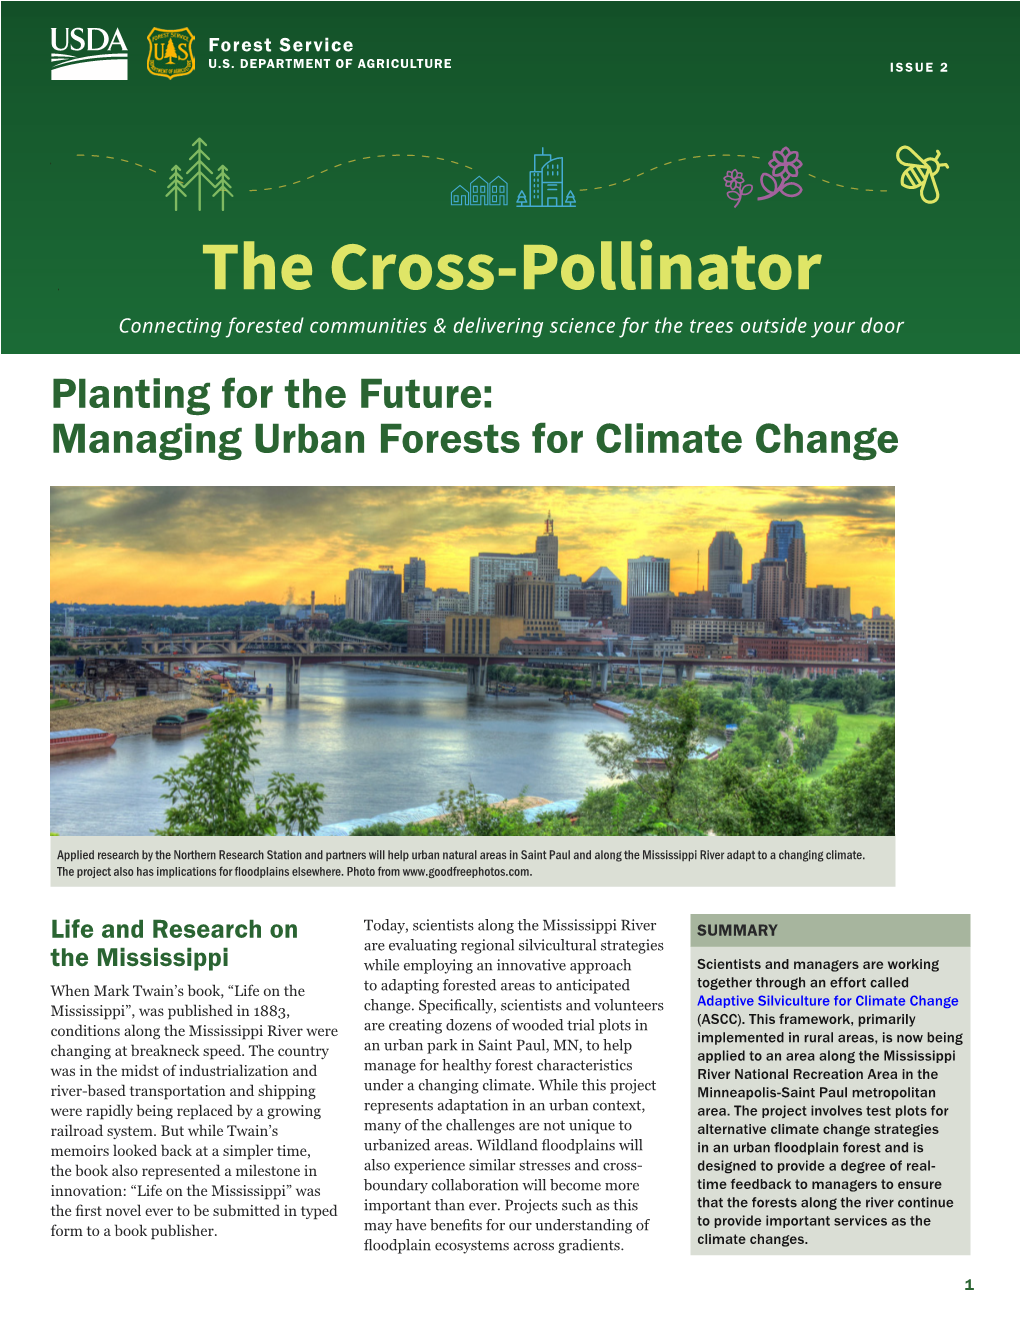 Managing Urban Forests for Climate Change